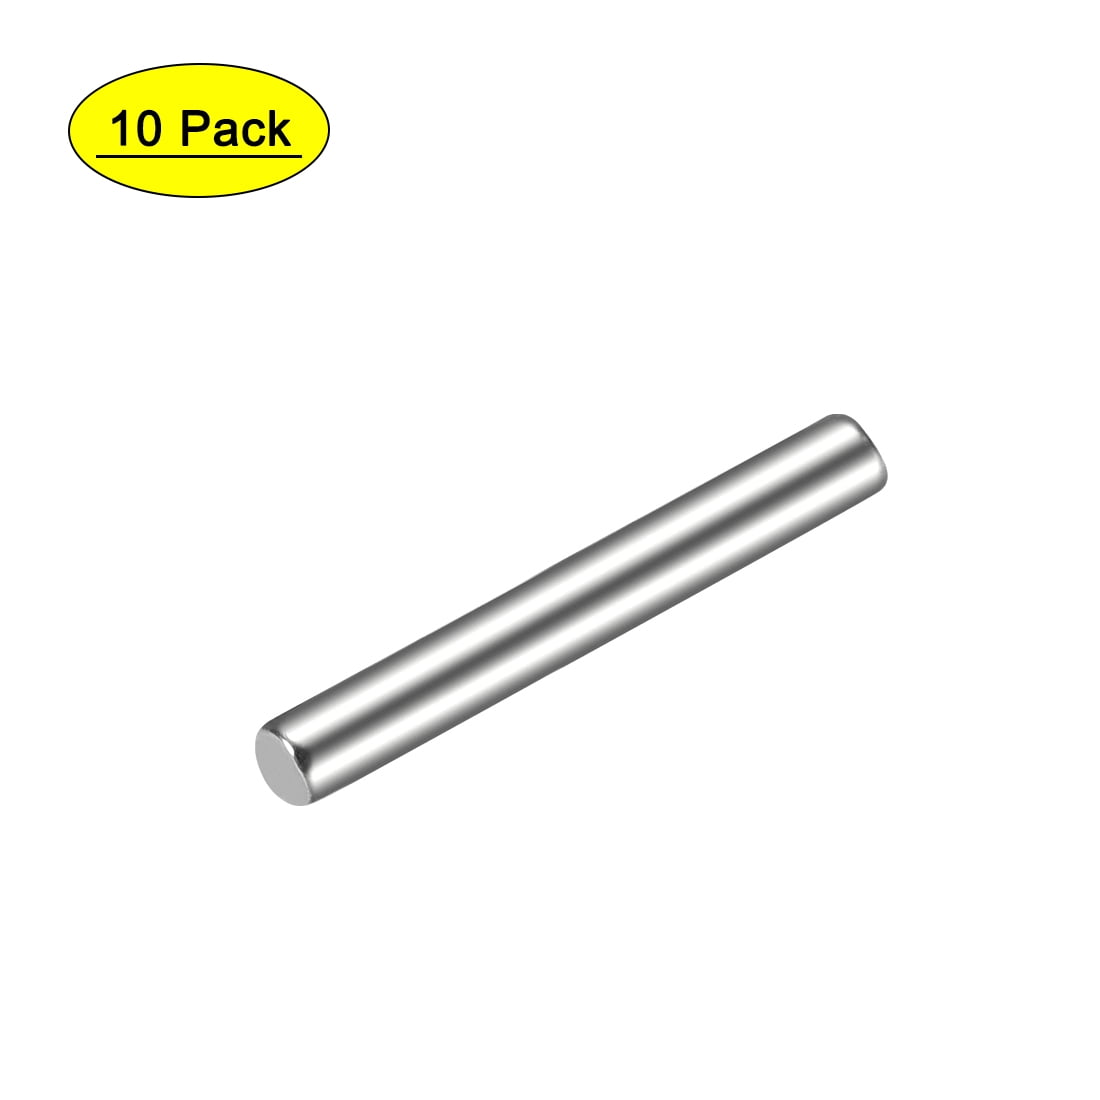 Details about   2Pcs 8mm x 35mm 1:50 Taper Pin 304 Stainless Steel Shelf Support Pin Fasten 